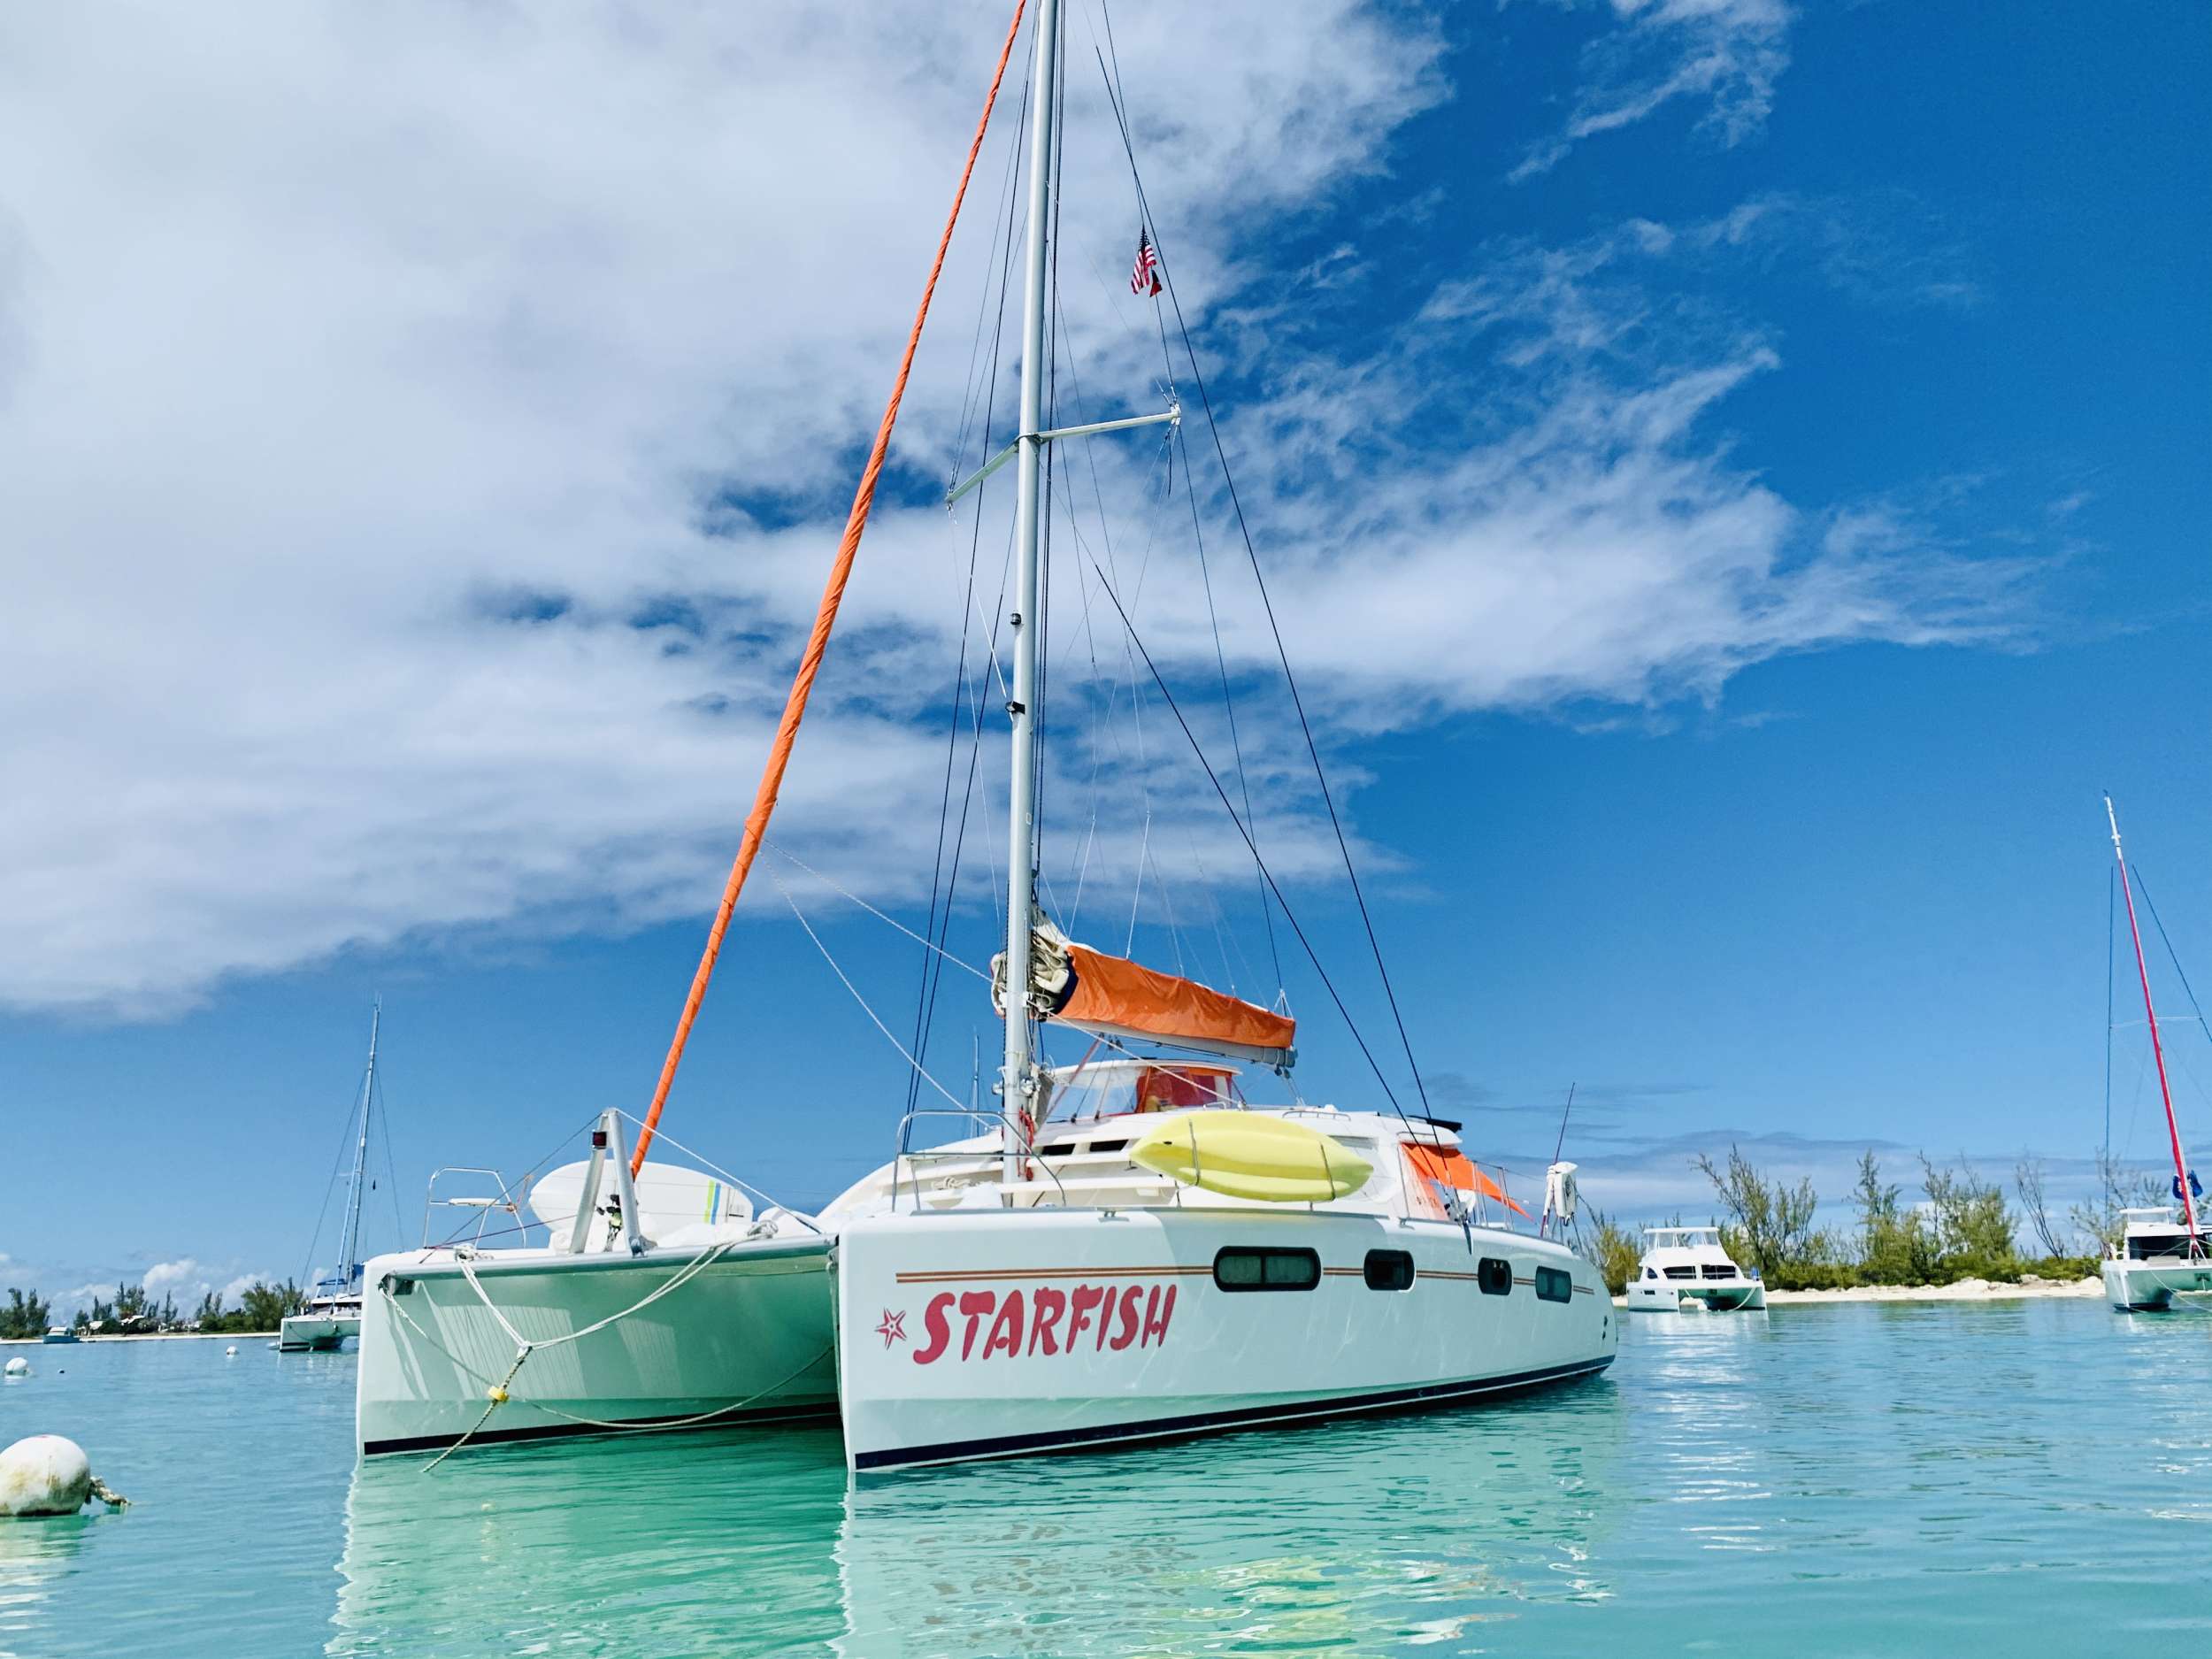 Award Winning Yacht:  2018 USVI Charter Yacht Show &ndash; &ldquo;Best in Show&rdquo; Runner-up (under 52&rsquo; yacht category)
Starfish is an immaculate and beautifully decorated 46' Robertson &amp; Caine Leopard catamaran. She sleeps 6 guests in 3 cabins with en suite heads and separate shower compartments.  (A 4th cabin and head is reserved for the crew.)  Live your dream aboard STARFISH!  Your crew, Sam and Jen, are longtime sailors who are now entering their 5th season of graciously hosting guests aboard STARFISH.   They are ready to welcome you aboard so that they may provide you with the very best in service, memorable experiences , and wonderfully pleasing menus tailored to your preferences.  